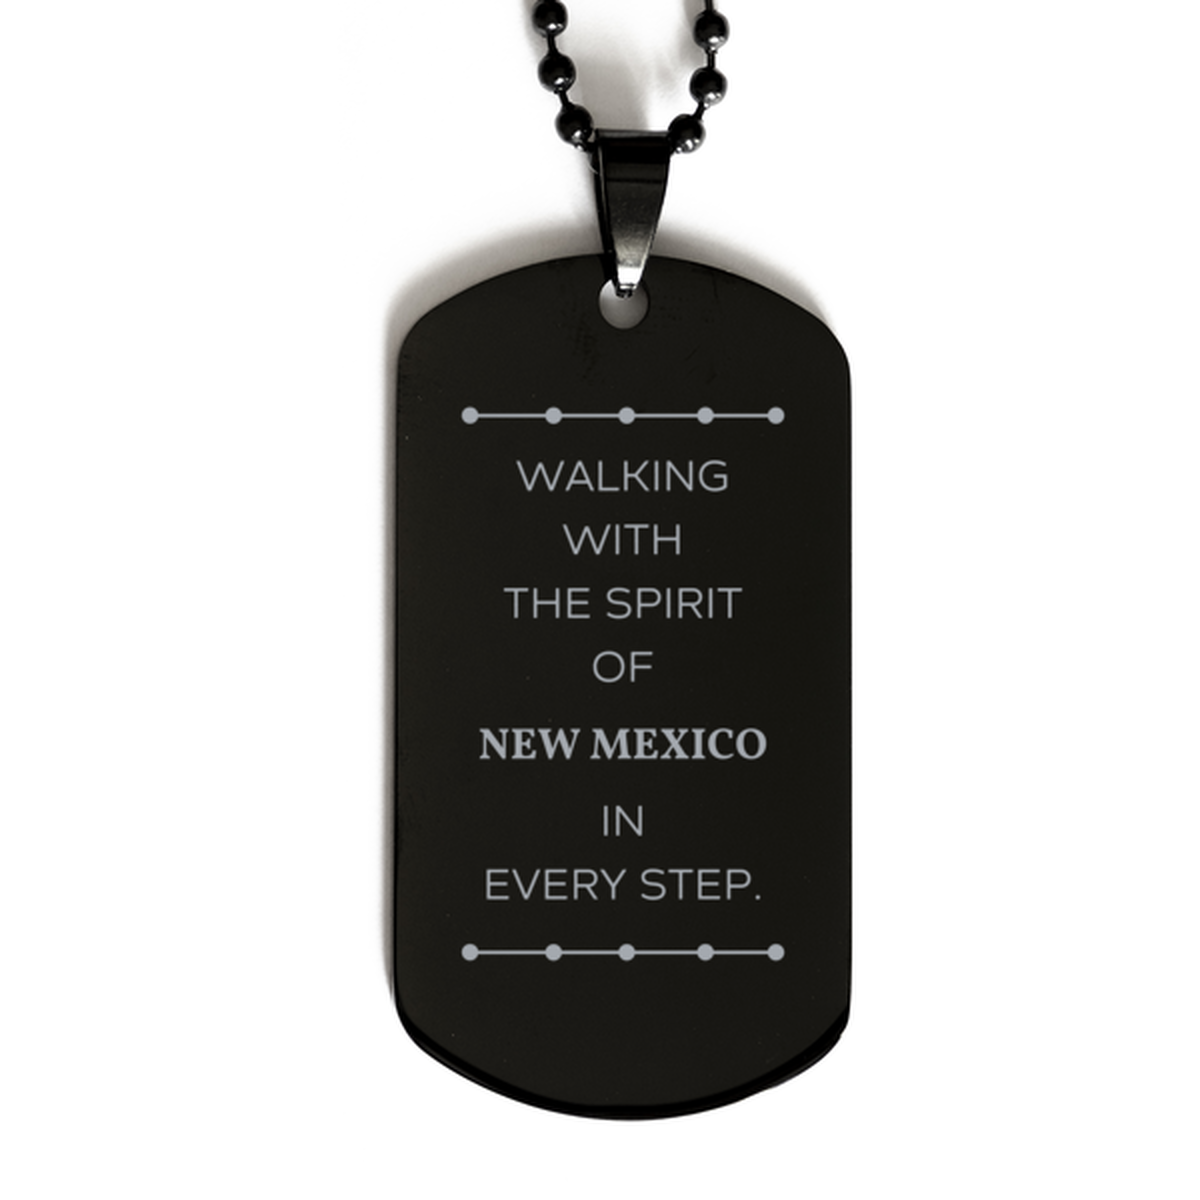 New Mexico Gifts, Walking with the spirit, Love New Mexico Birthday Christmas Black Dog Tag For New Mexico People, Men, Women, Friends